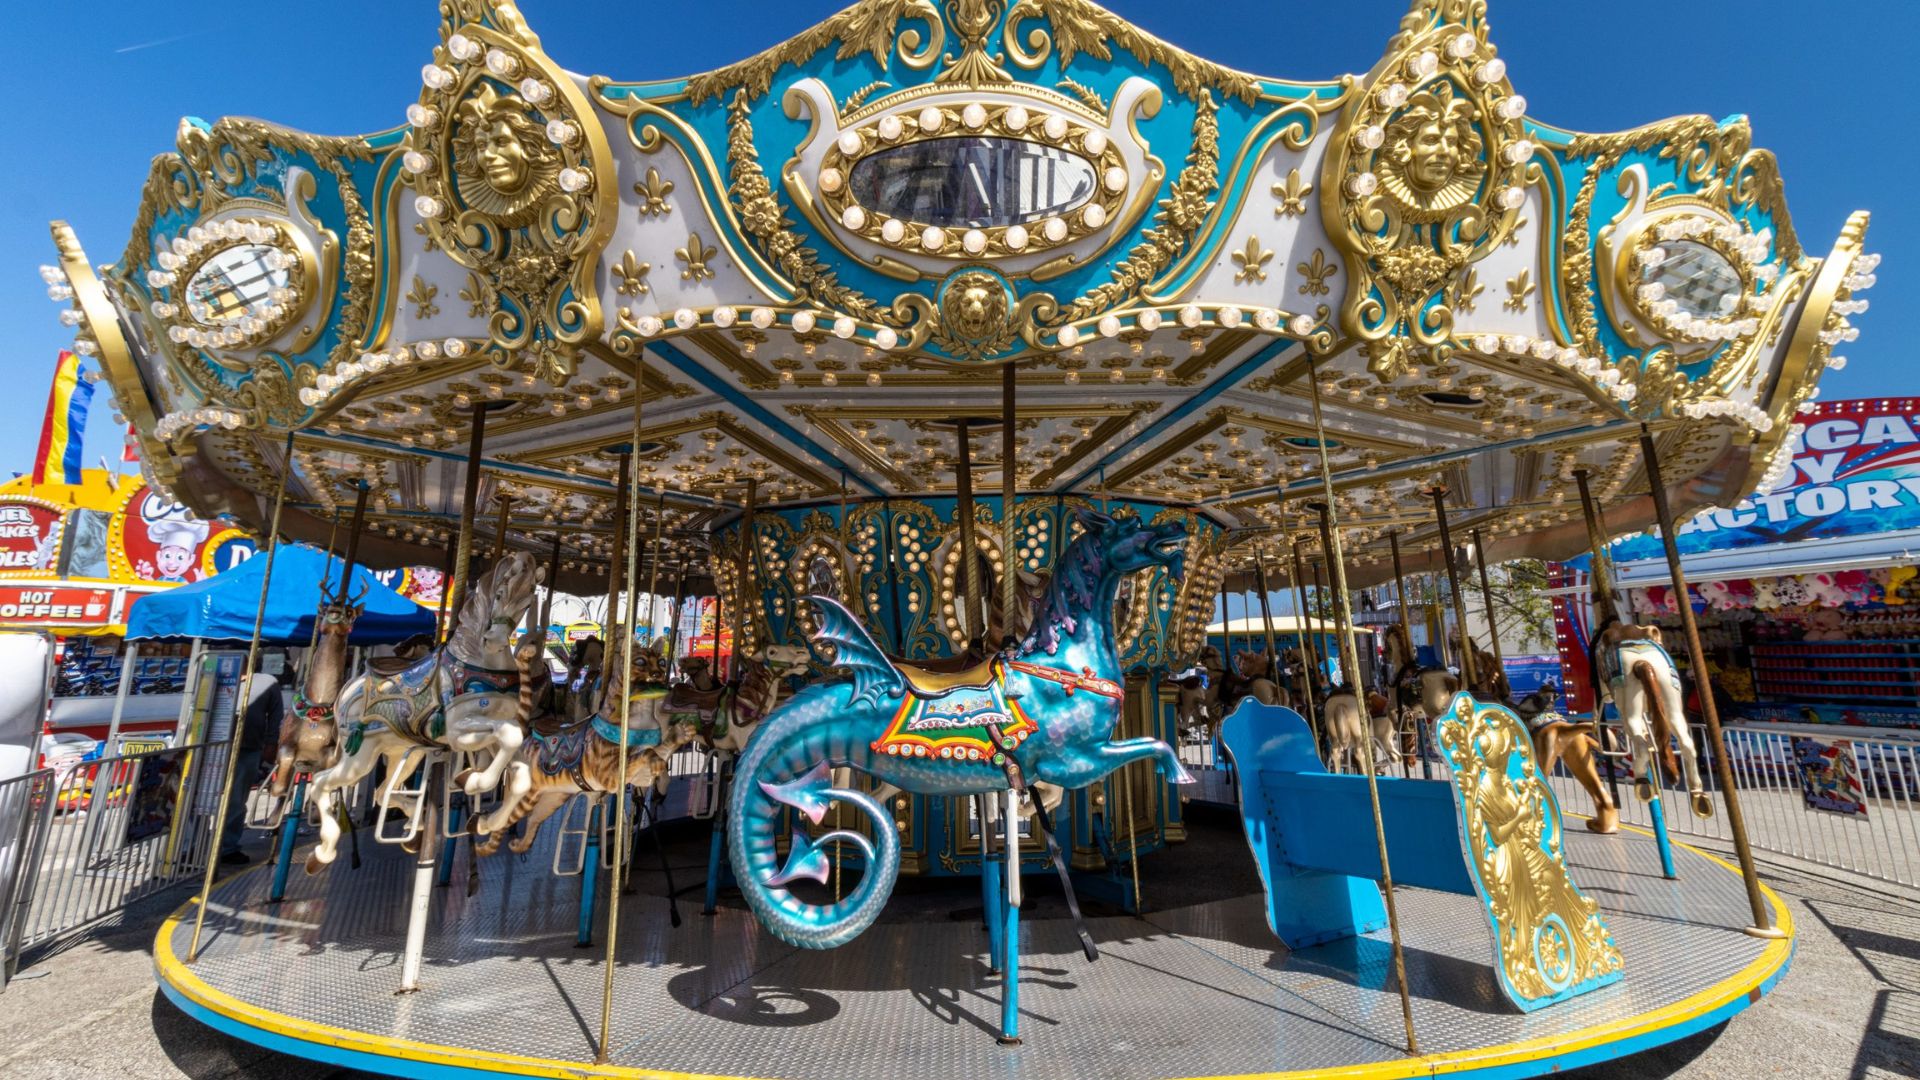 A beautiful blue and gold carousel